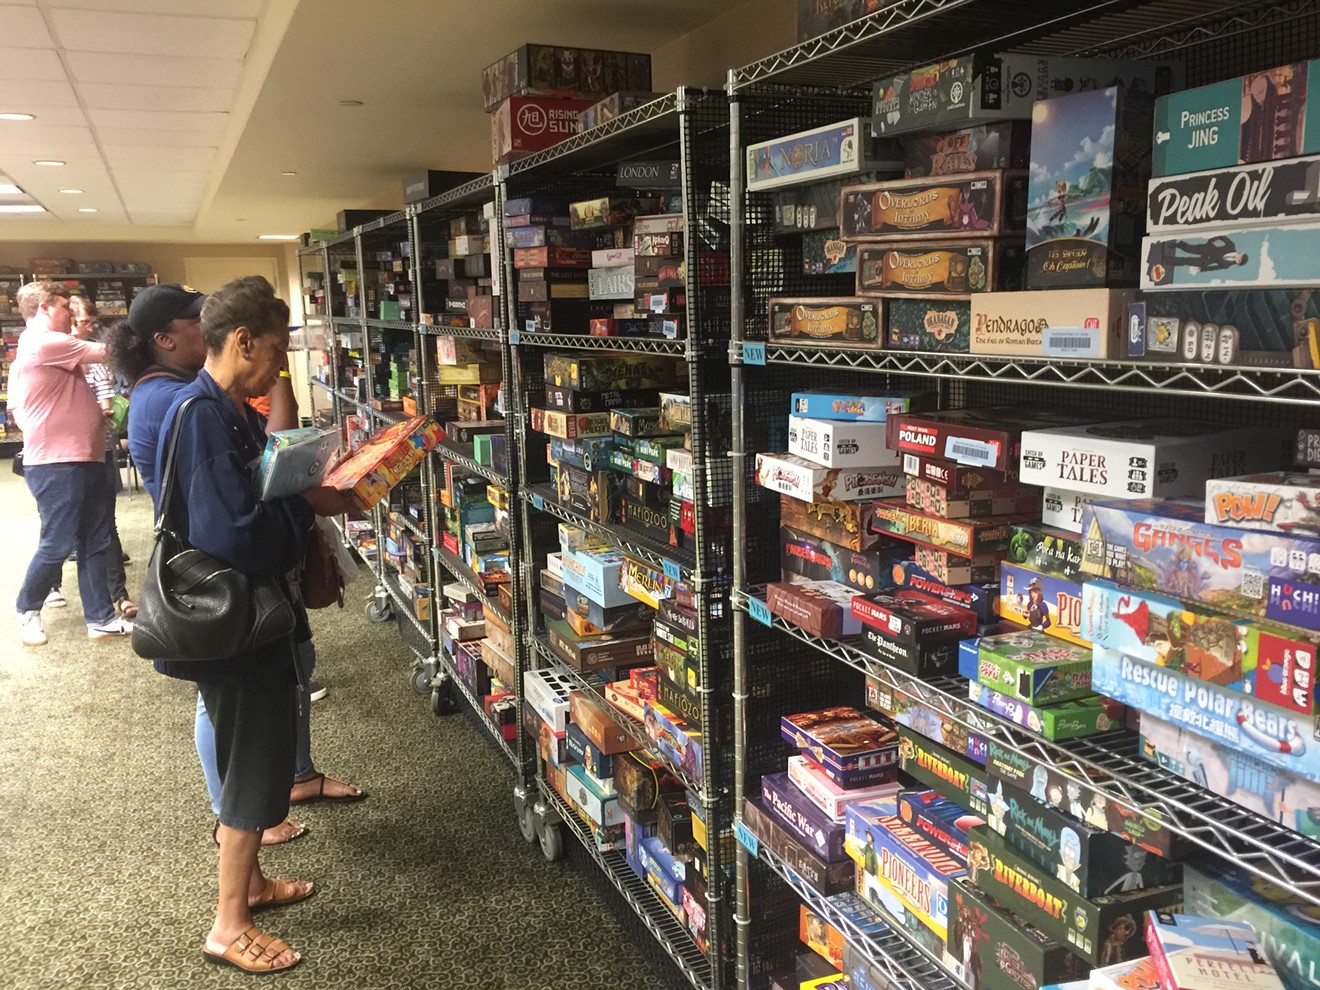 The Board Game Geek website's spring convention at the Hyatt Regency DFW Hotel had more than 1,000 new board games.